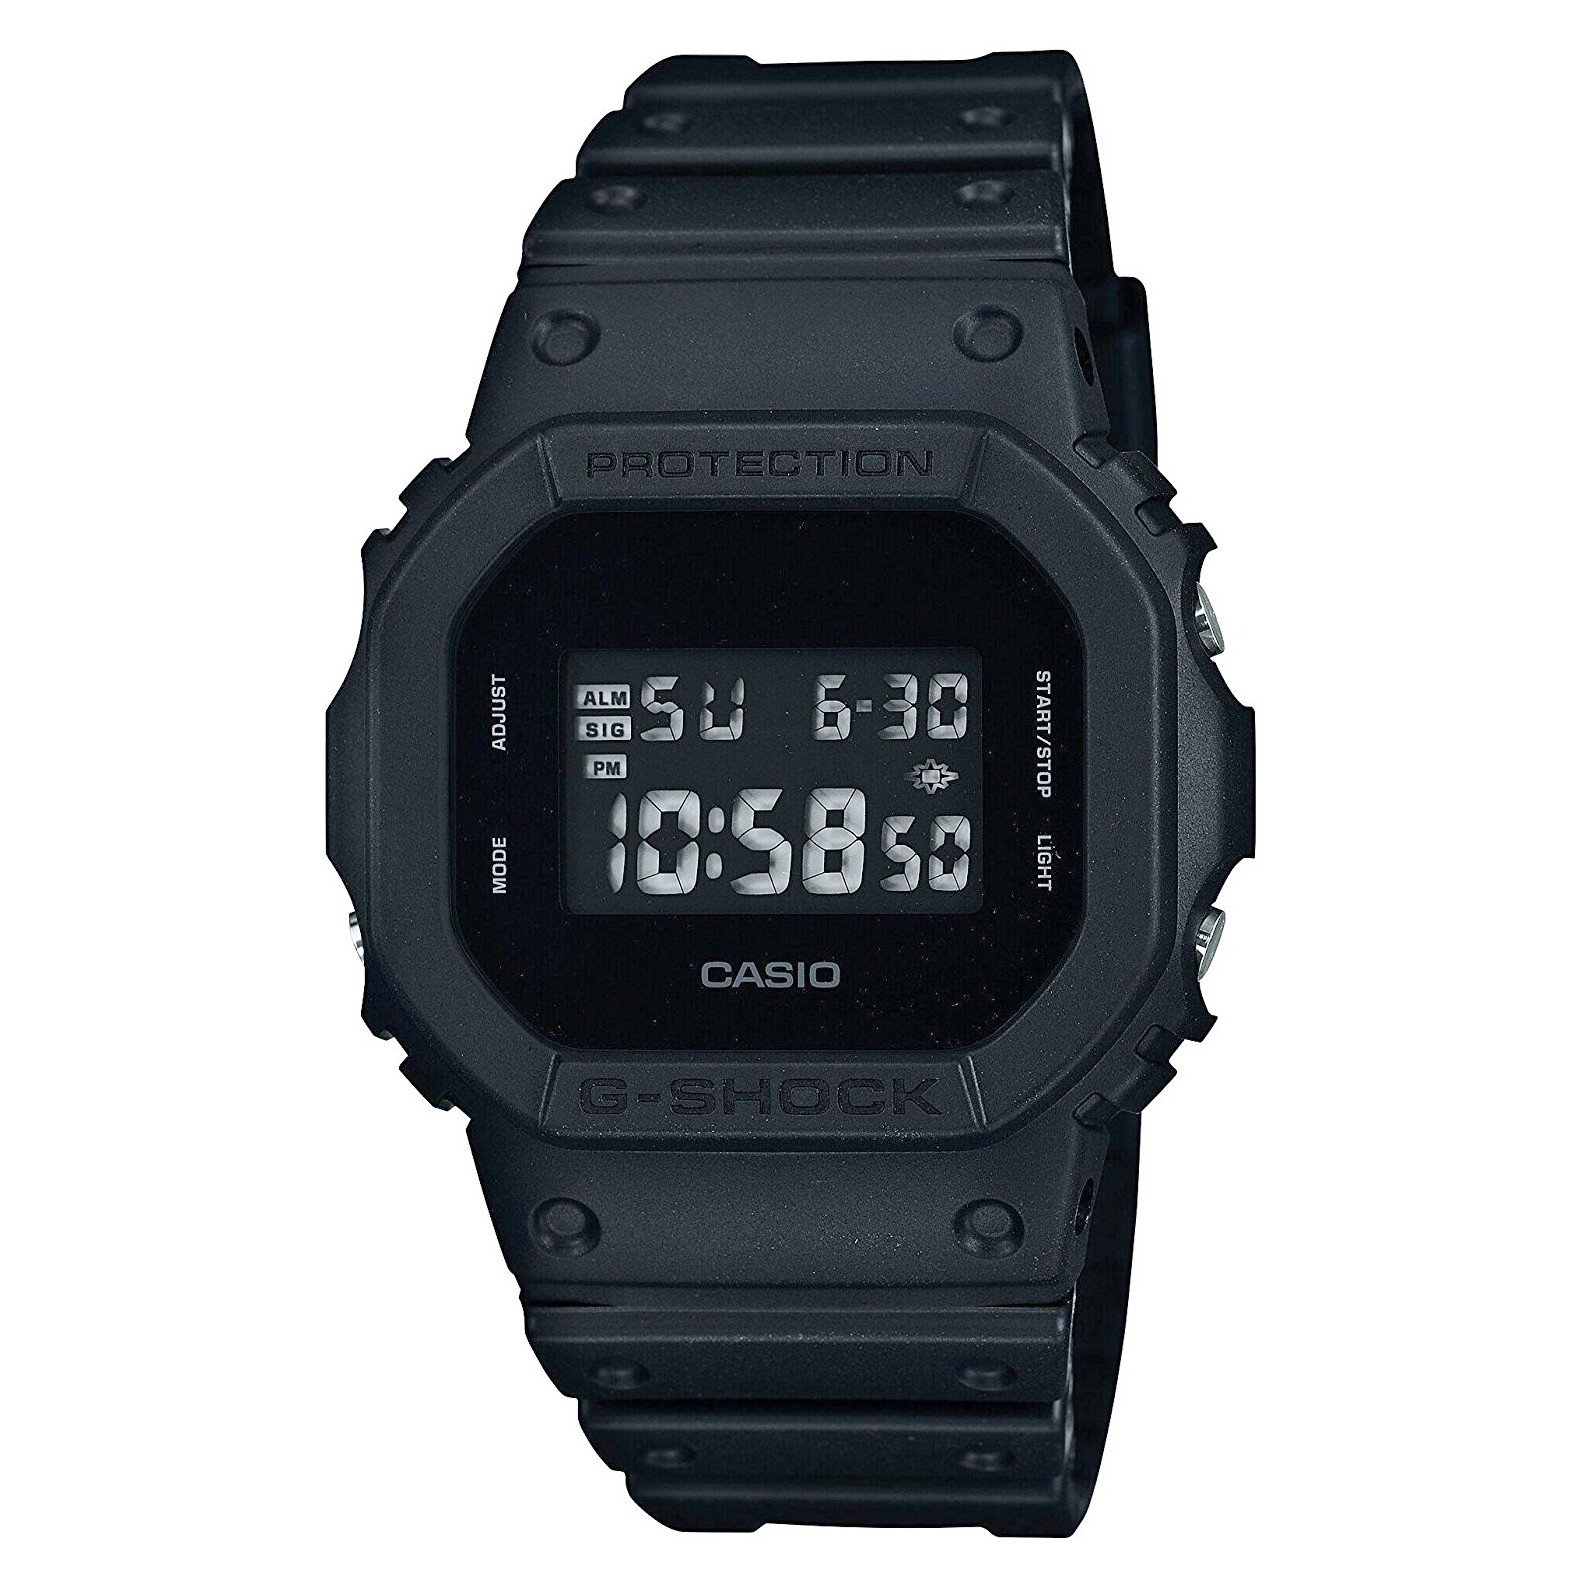 Casio G-Shock Specials DW-5600BB-1CR 49mm in Resin - US